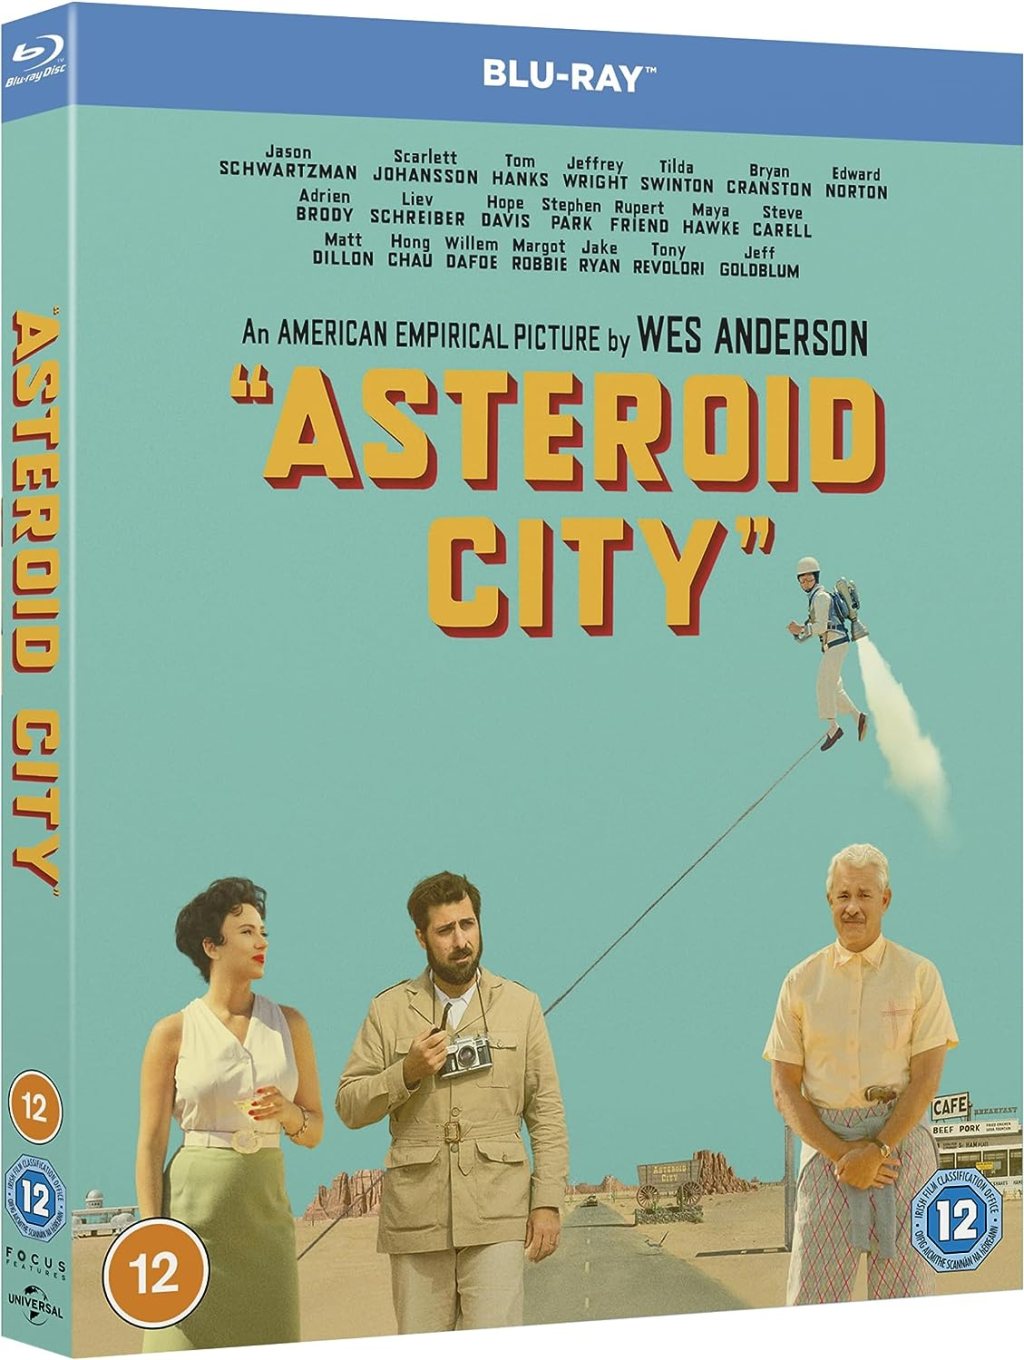 Asteroid City Blu-ray review: Dir. Wes Anderson